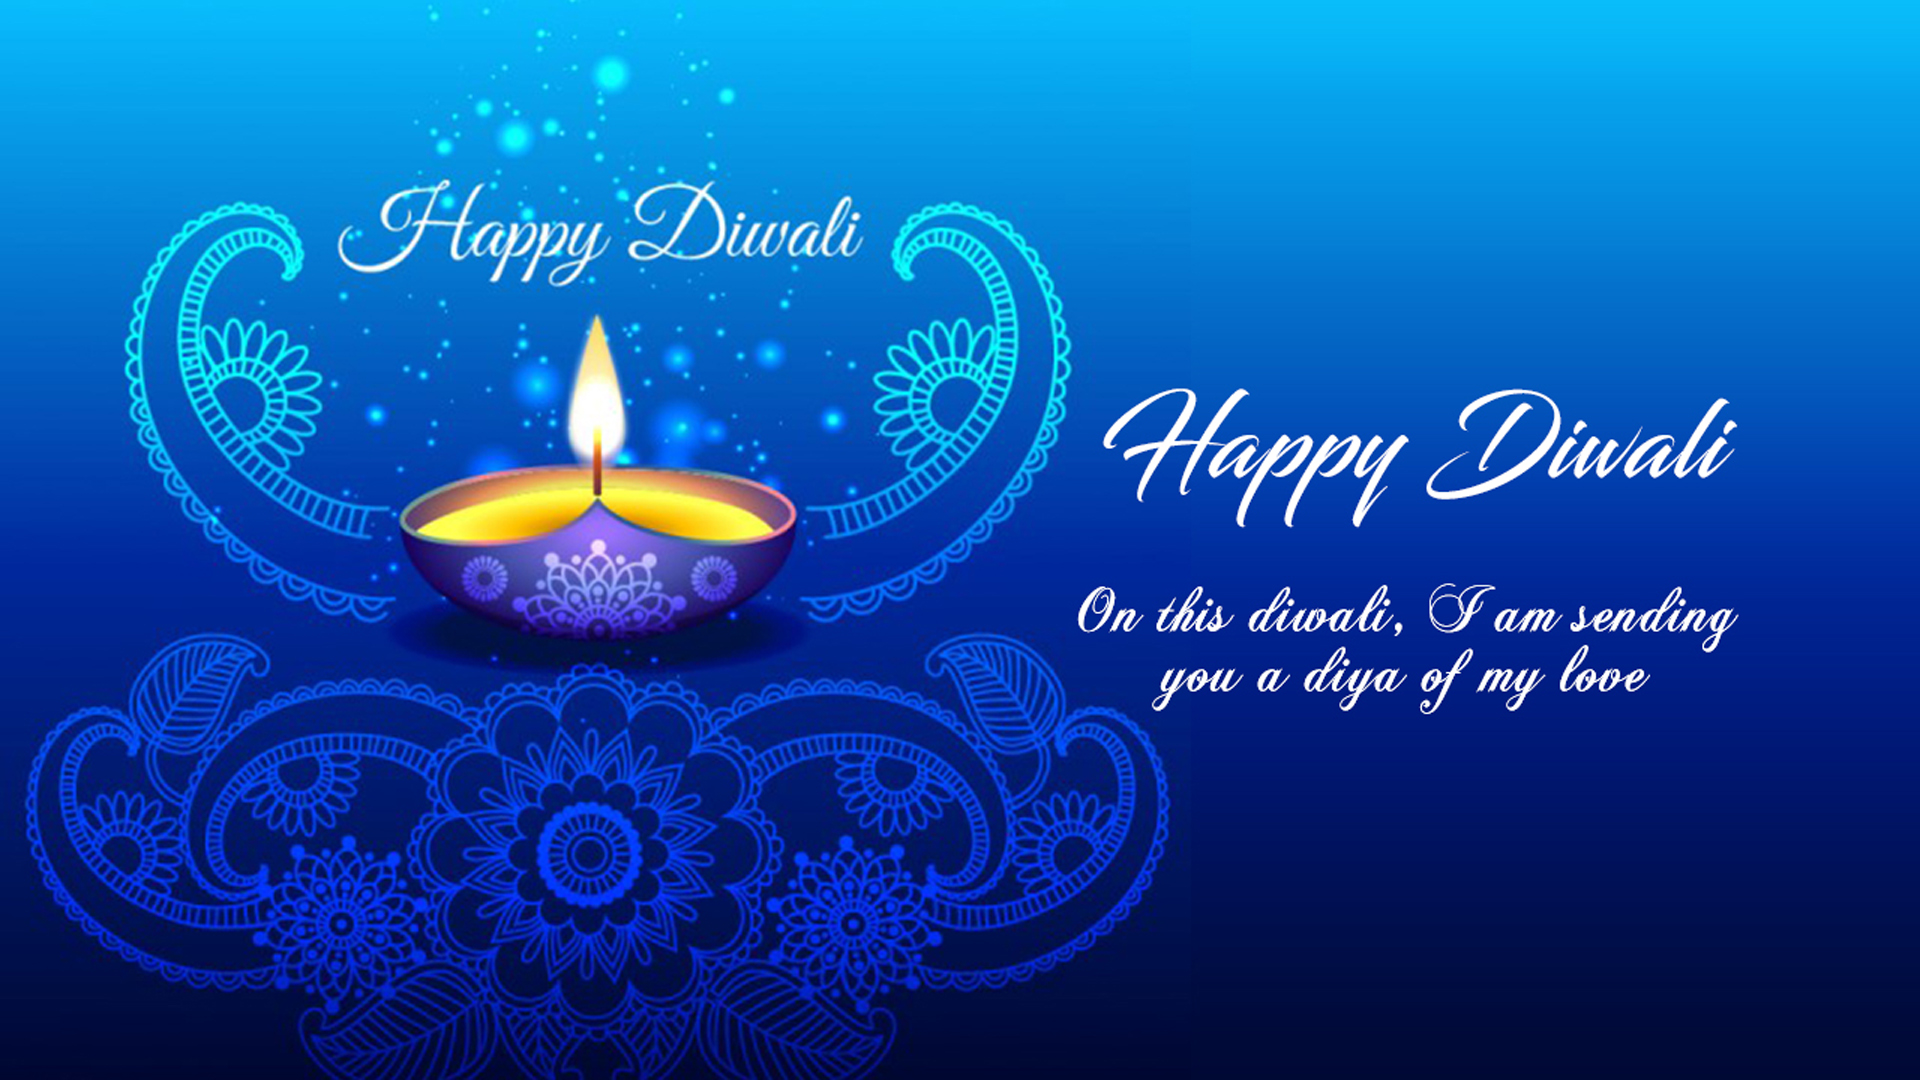 Happy Diwali 2022 Photos Wishes Greeting Card Blue Background Download  1920x1080 : 